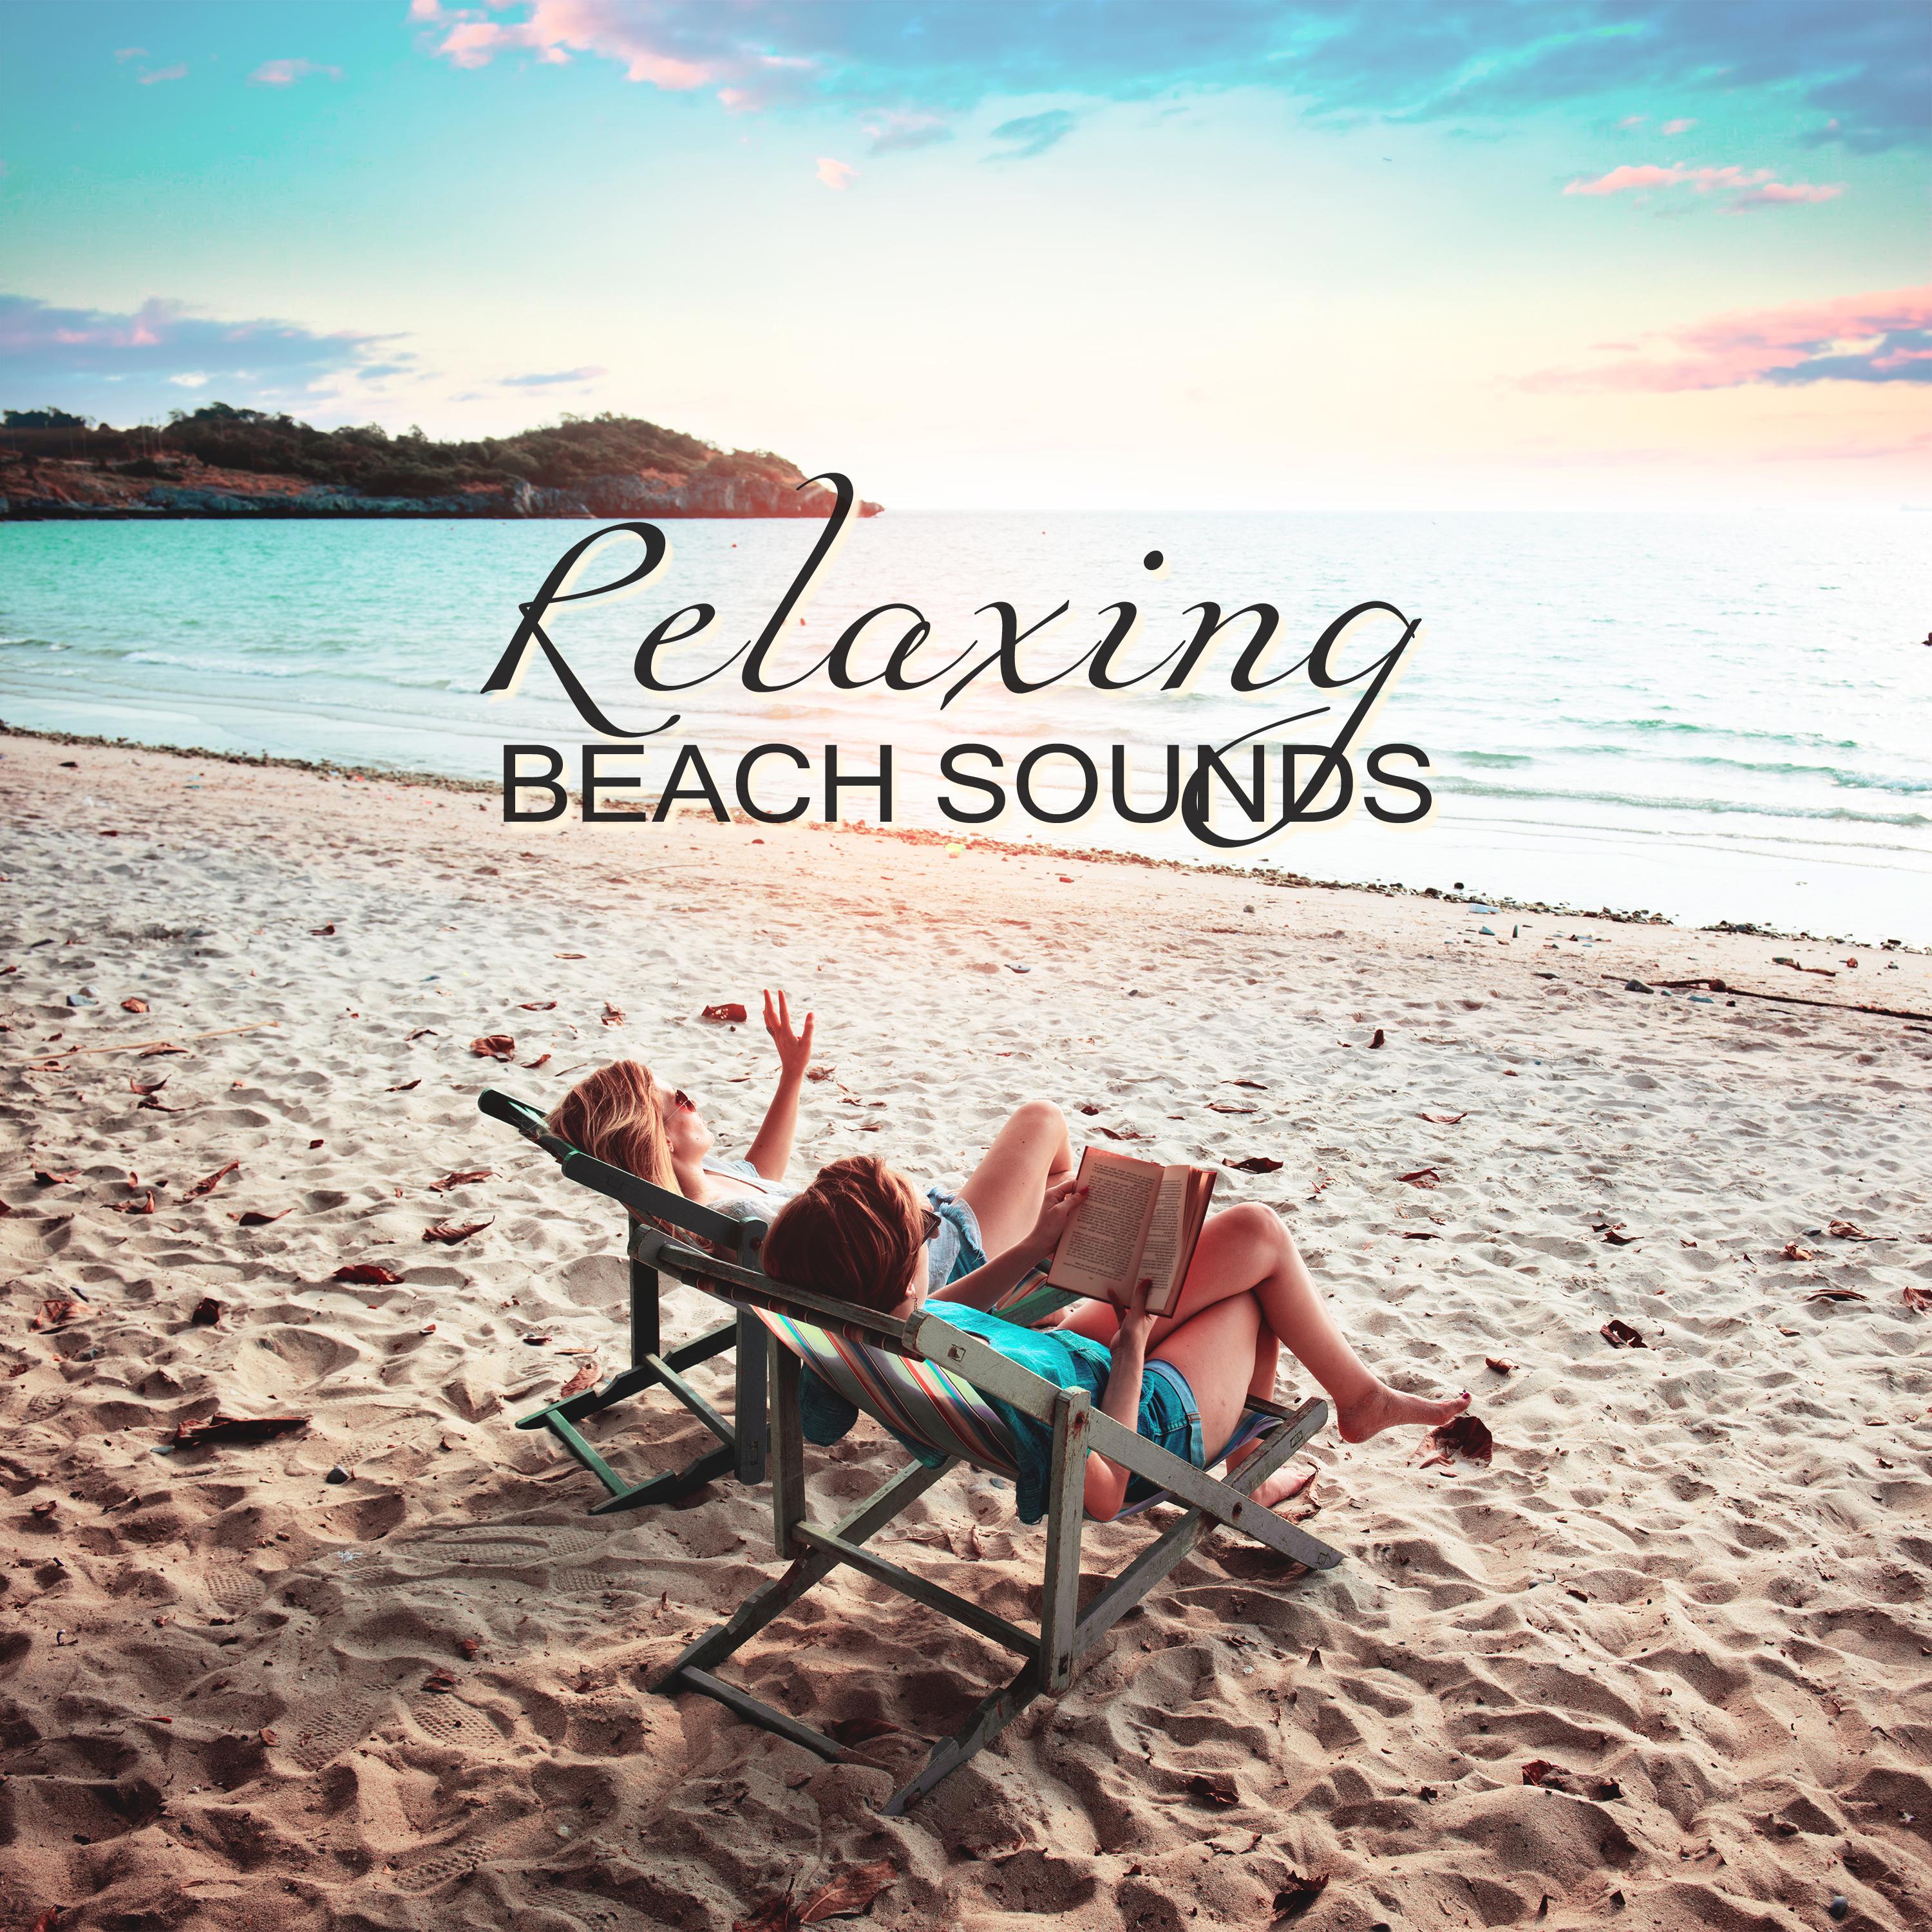 Relaxing Beach Sounds  Chill Out 2017, Rest a Bit, Summer Time Relaxation, Holiday Vibes